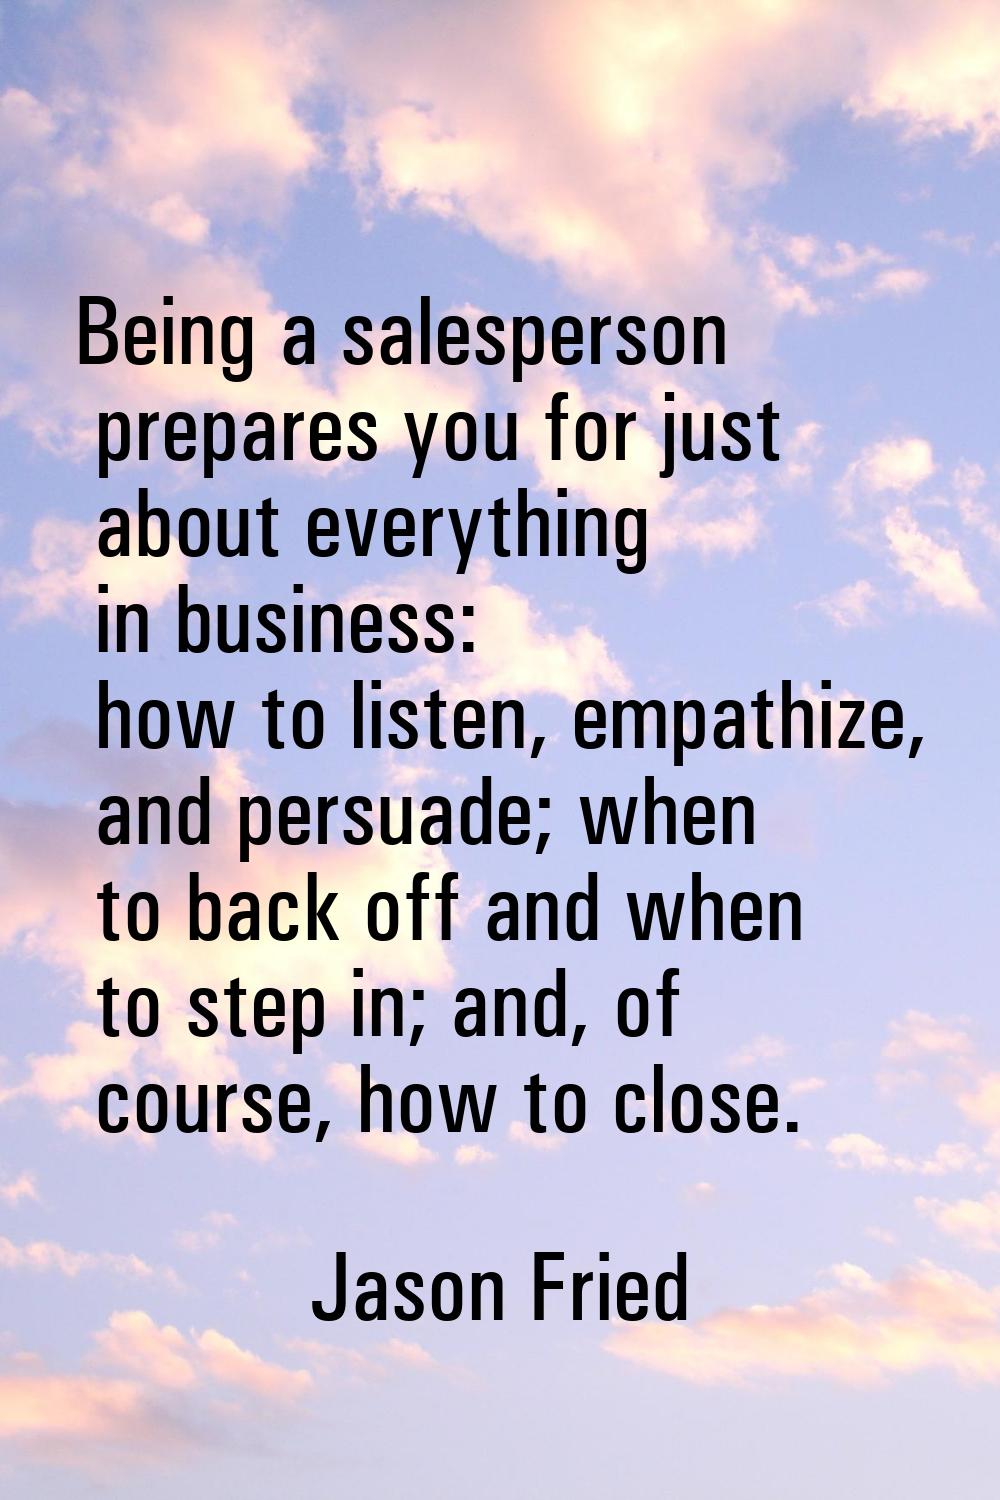 Being a salesperson prepares you for just about everything in business: how to listen, empathize, a